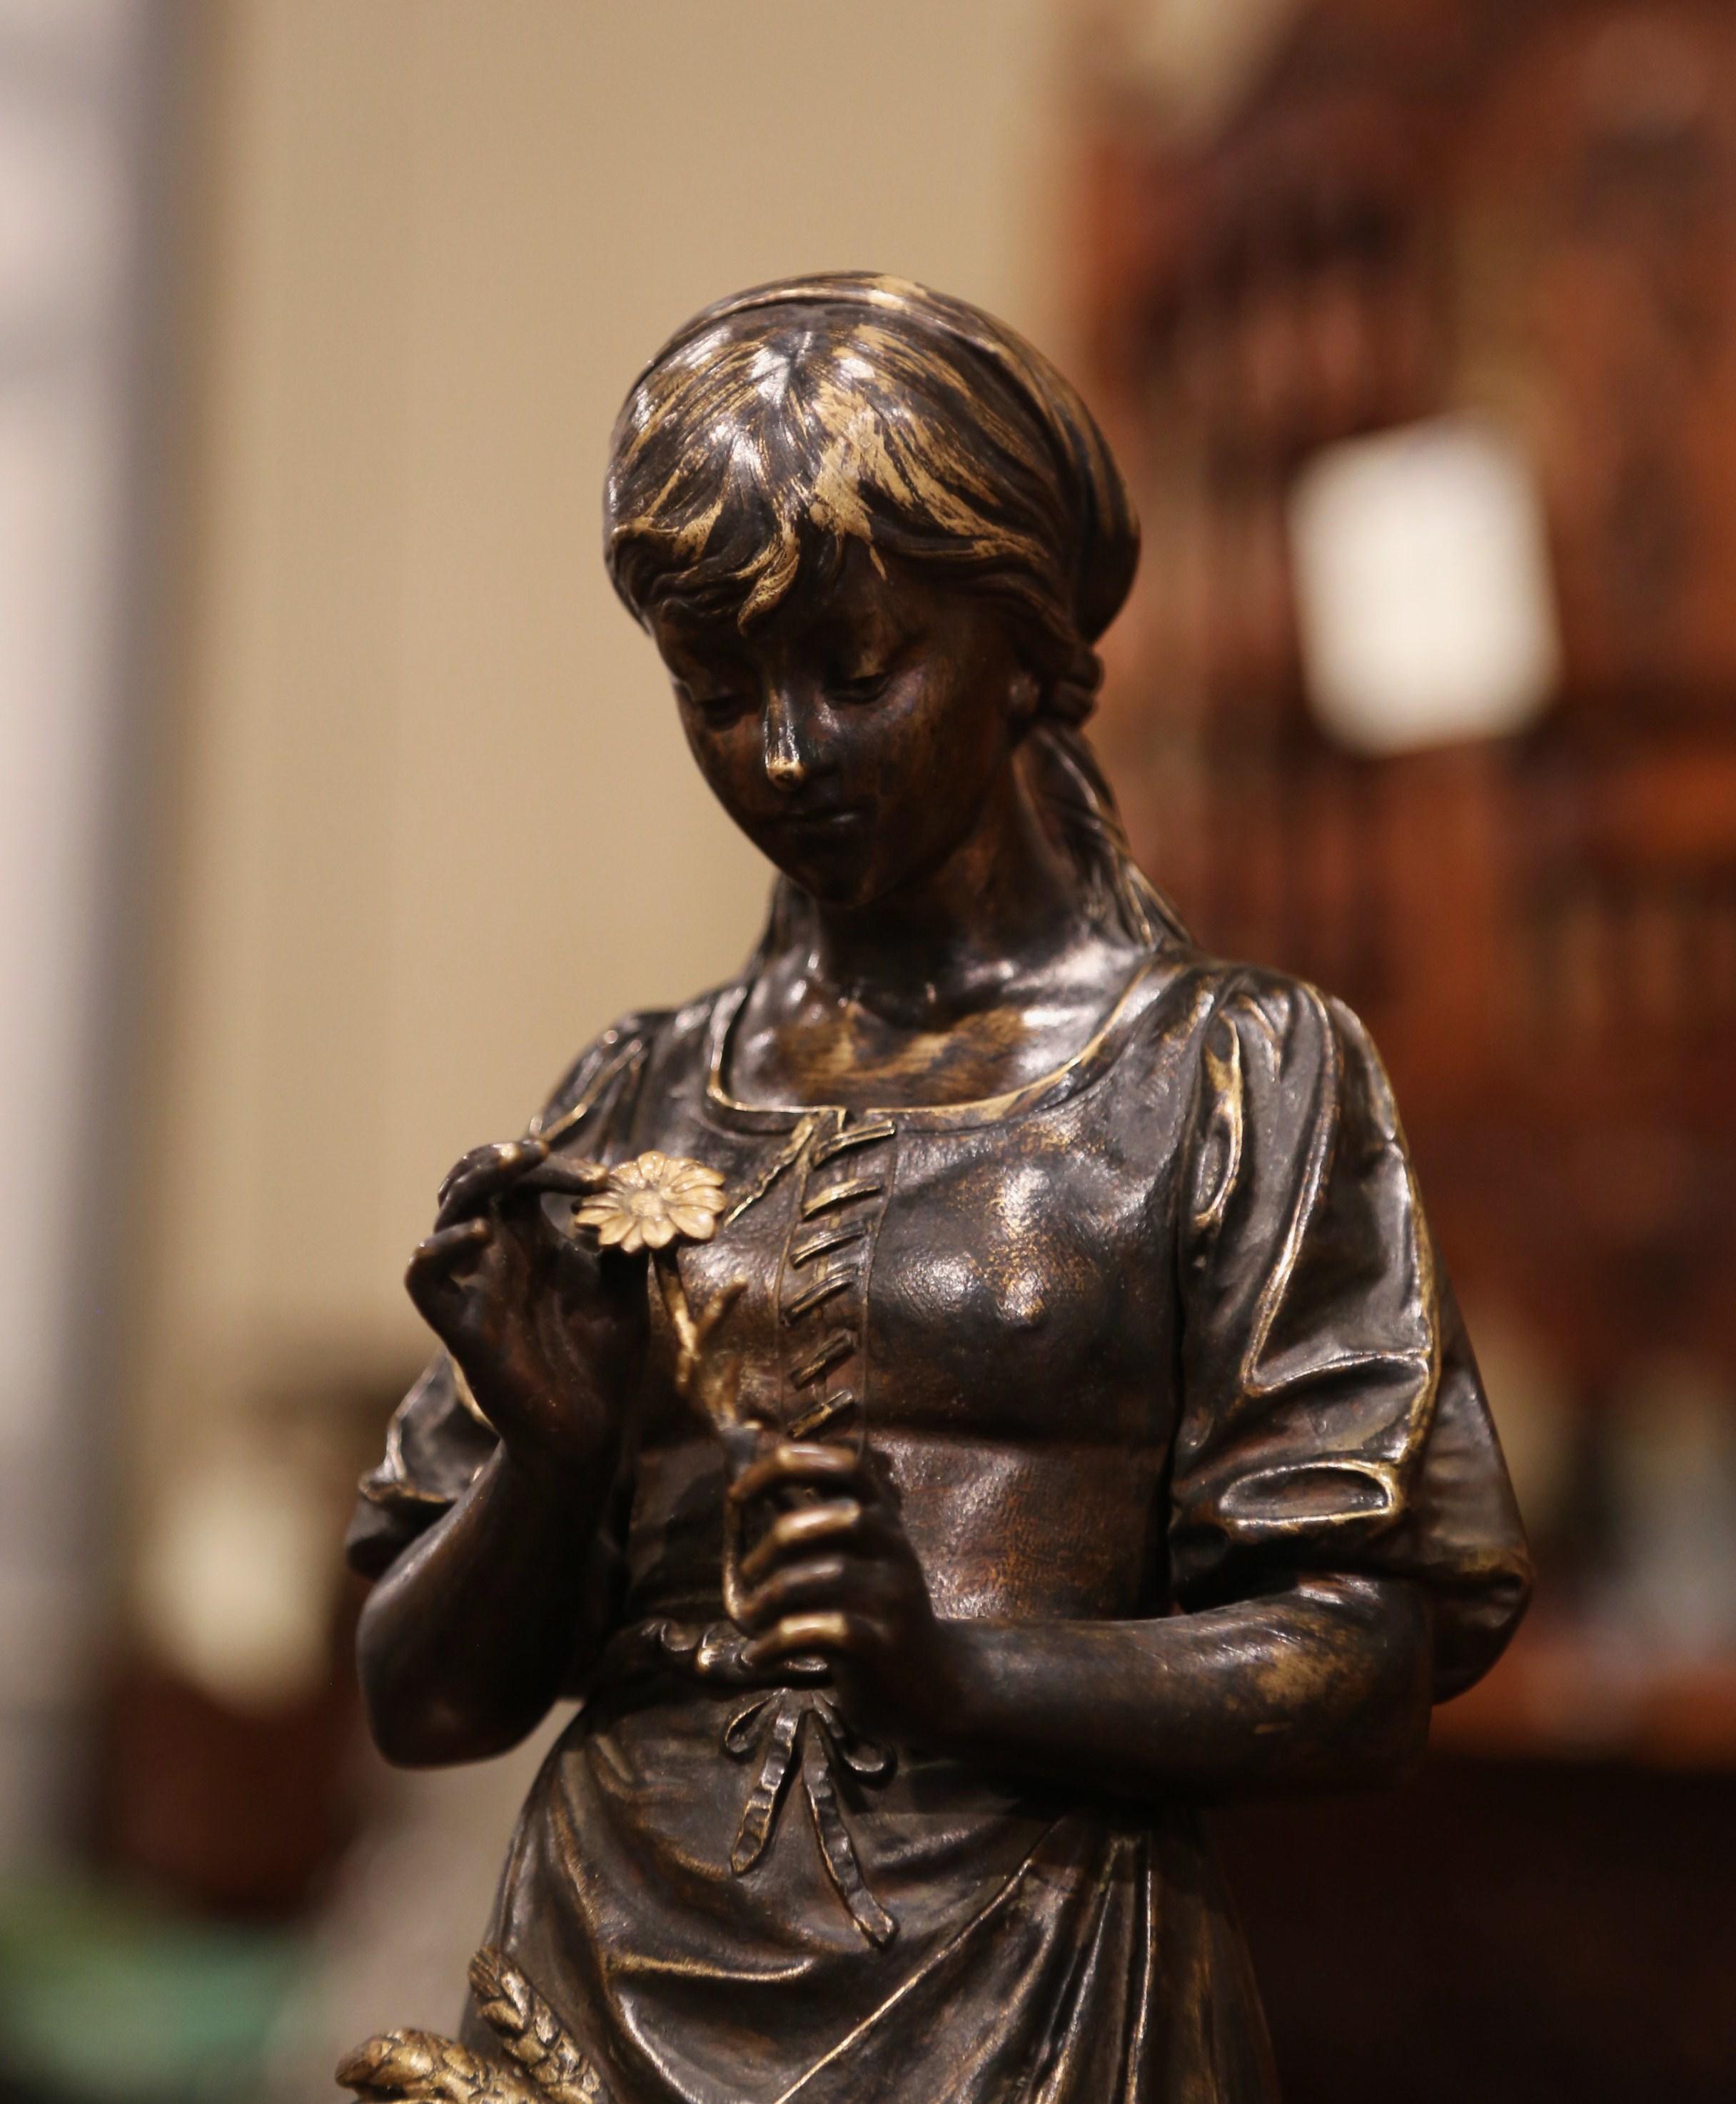 Decorate a shelf or a desk with this elegant antique bronze patinated sculpture. Crafted in France, circa 1870, the bronze features a young beauty coming back from the fields carrying sheaves of wheat. The woman figure is in excellent condition with